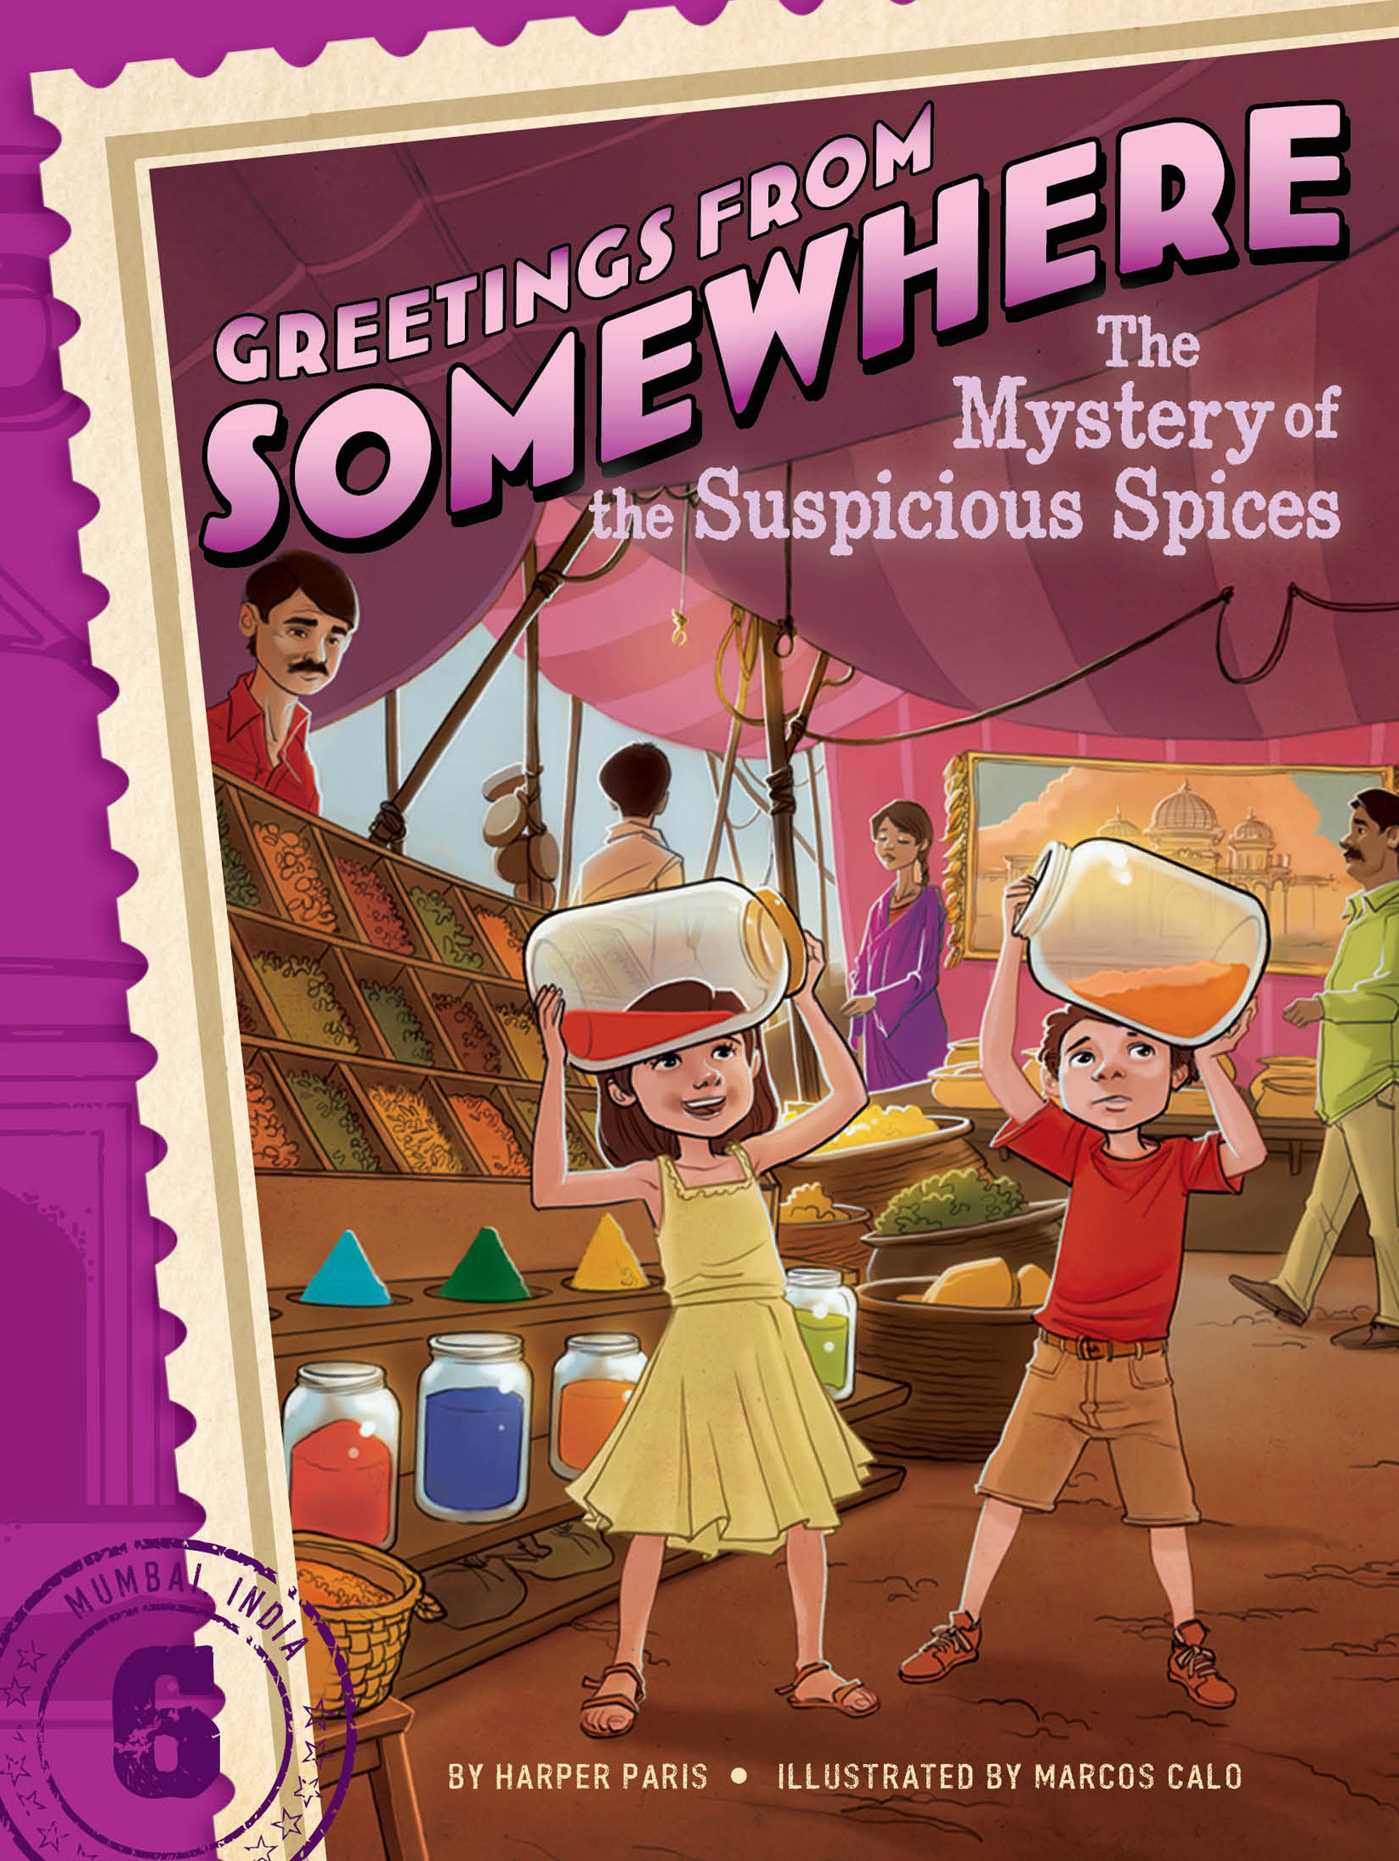 GREETINGS FROM SOMEWHERE 6 MISTERY OF THE SUSPICIOUS SPICES